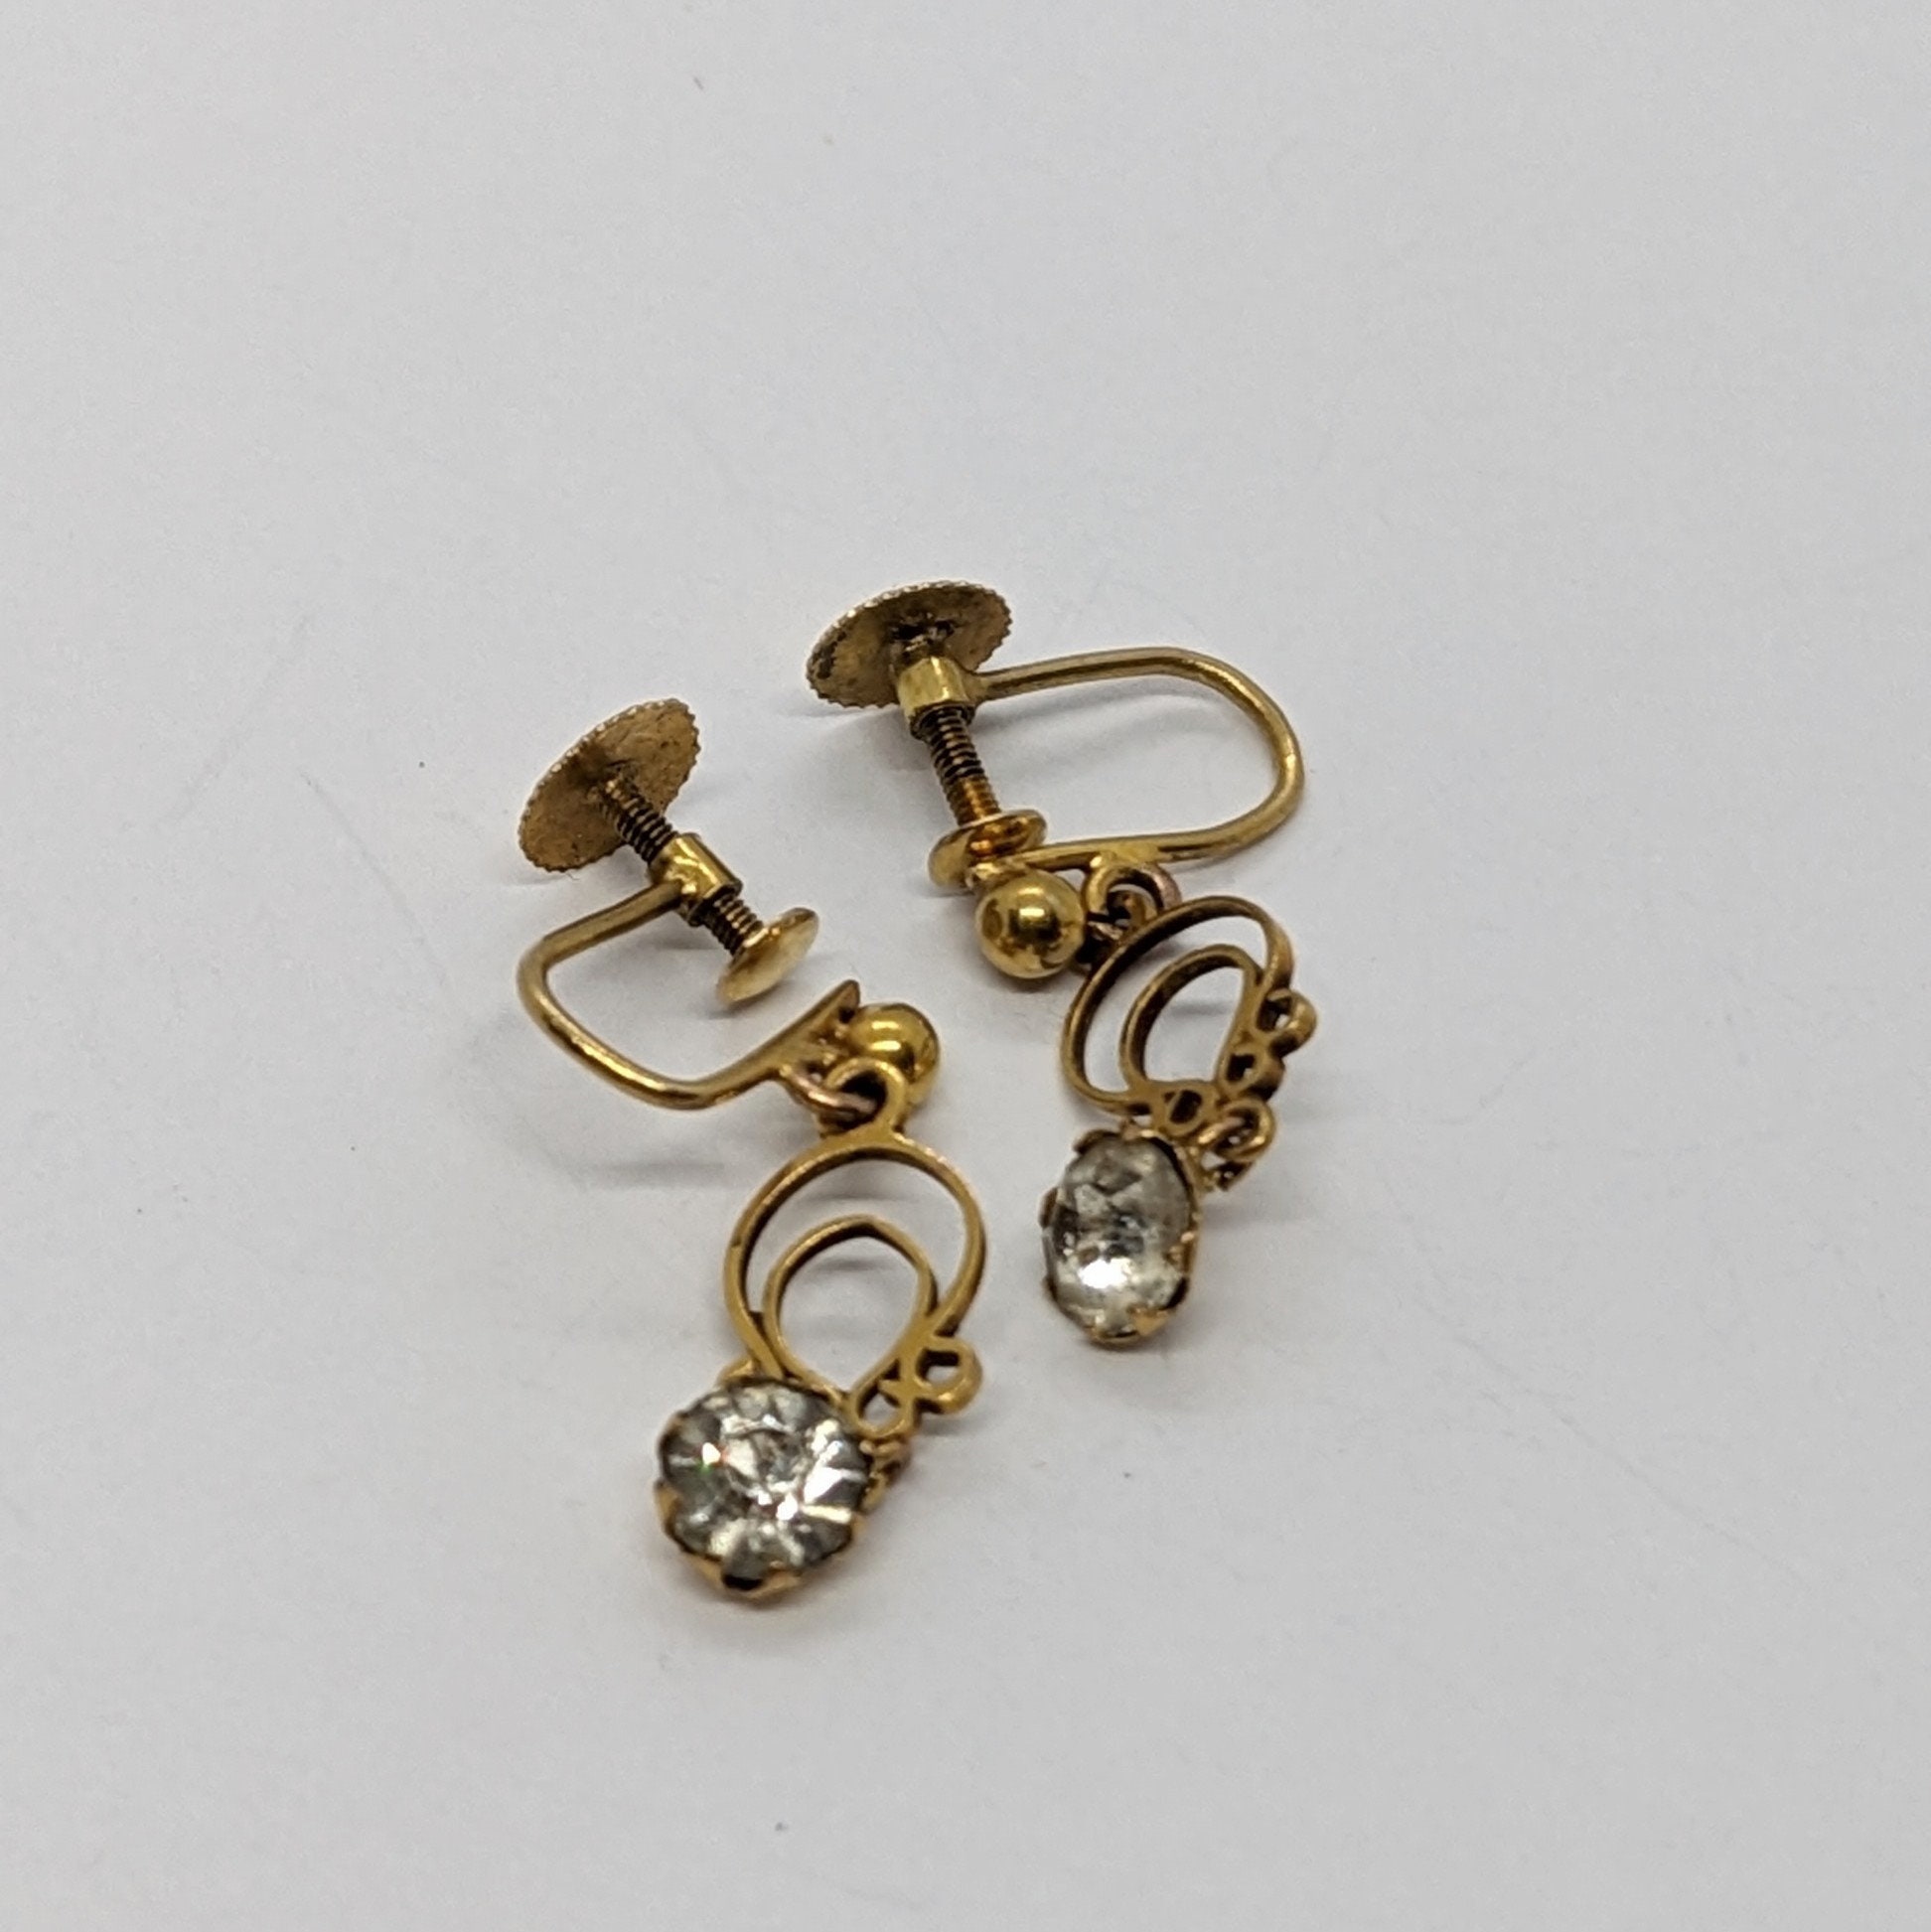 14K Solid White & Yellow Gold Replacement Single Screw Back for Stud  Earrings